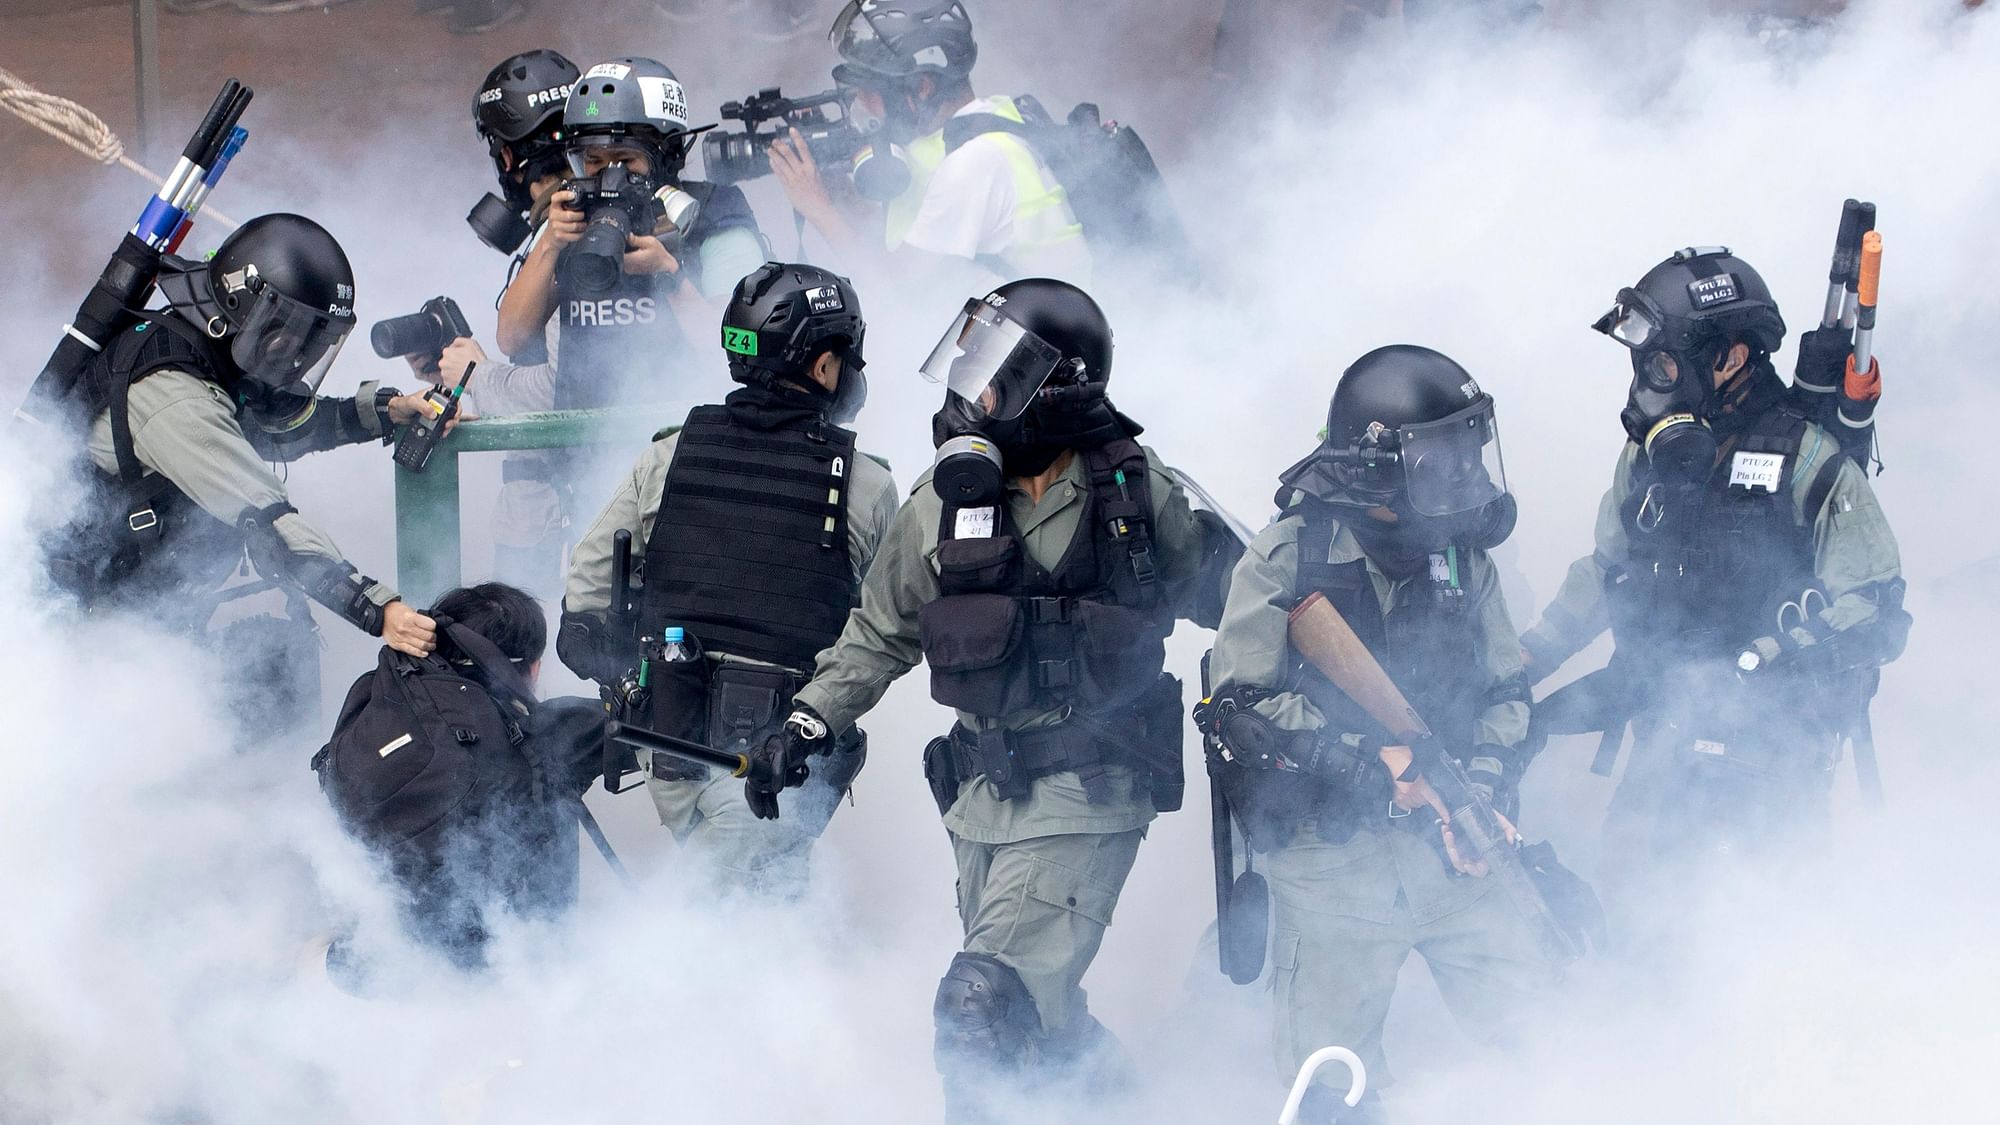 Police in riot gear move through a cloud of smoke as they detain a protester at the Hong Kong Polytechnic University in Hong Kong on Monday, 18 November 2019.